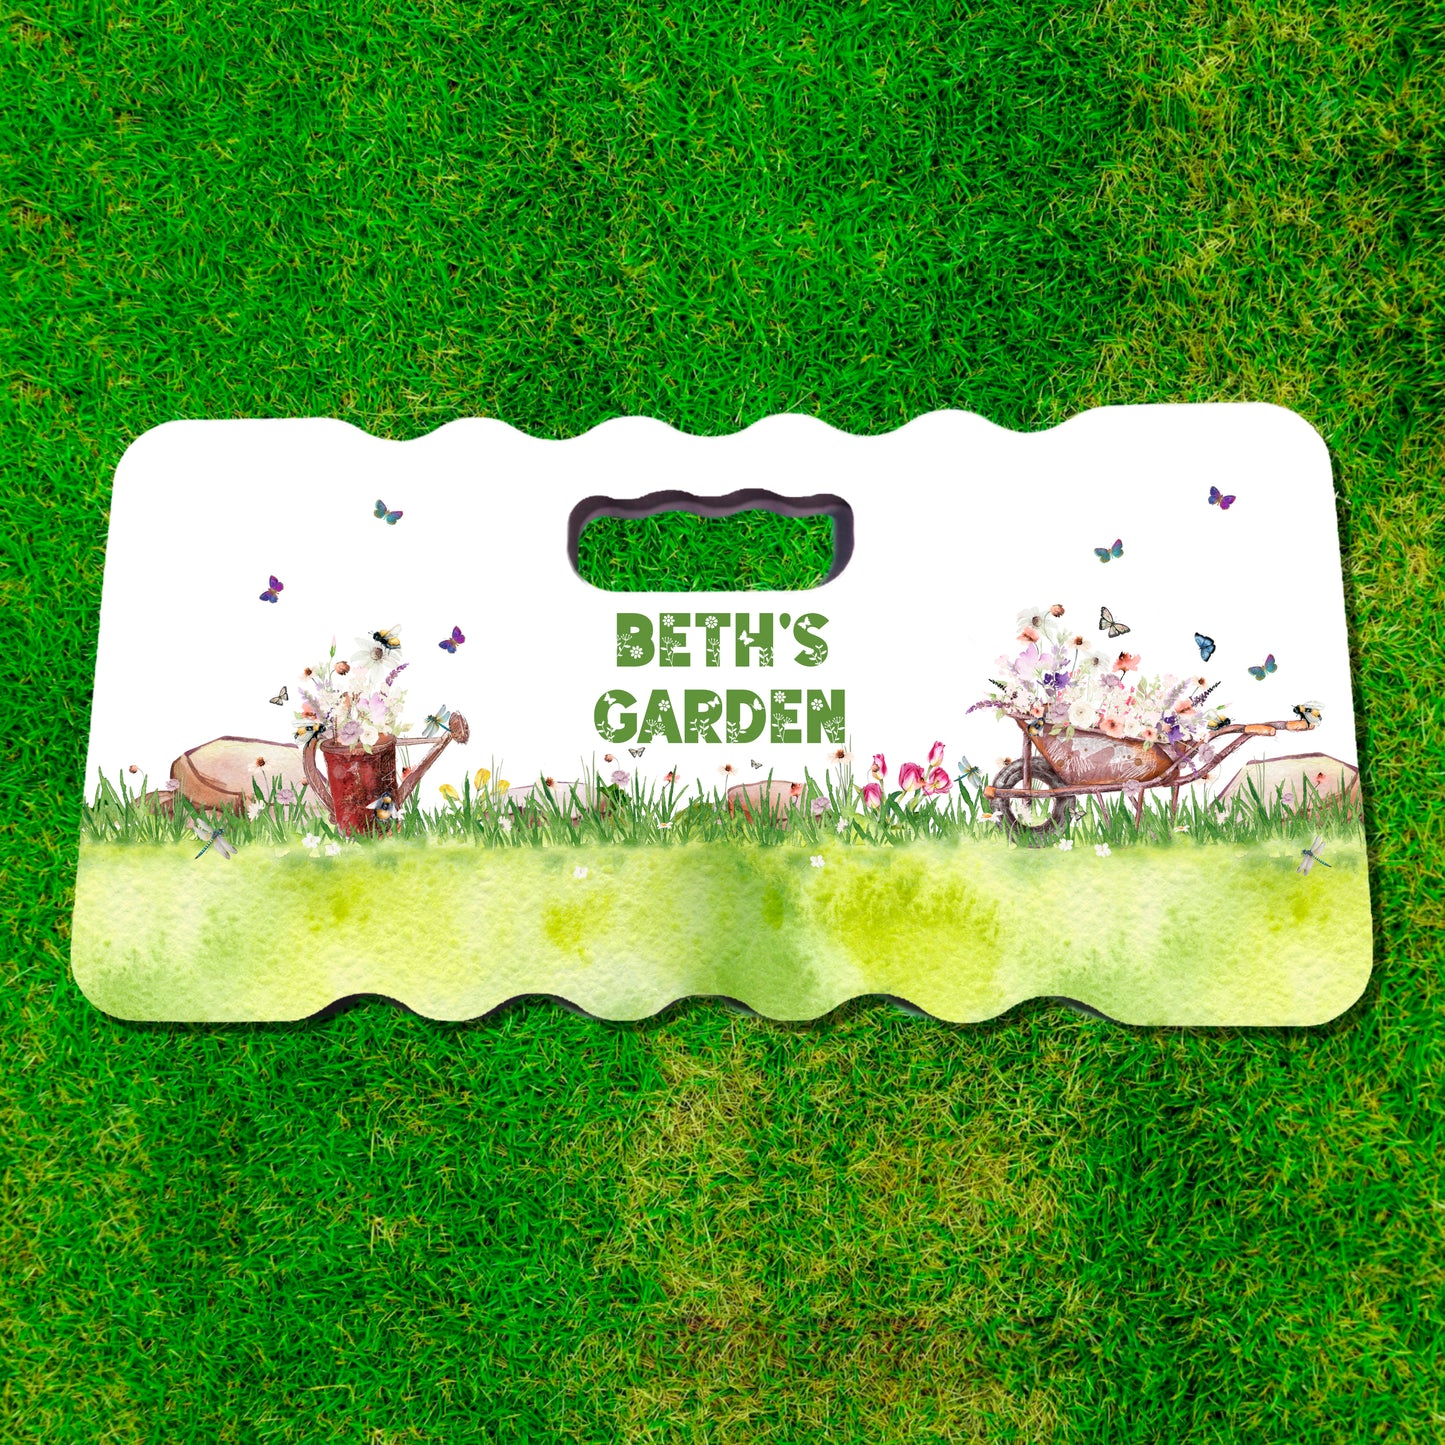 Foam kneeling pad with floral watering can and wheelbarrow beth's garden